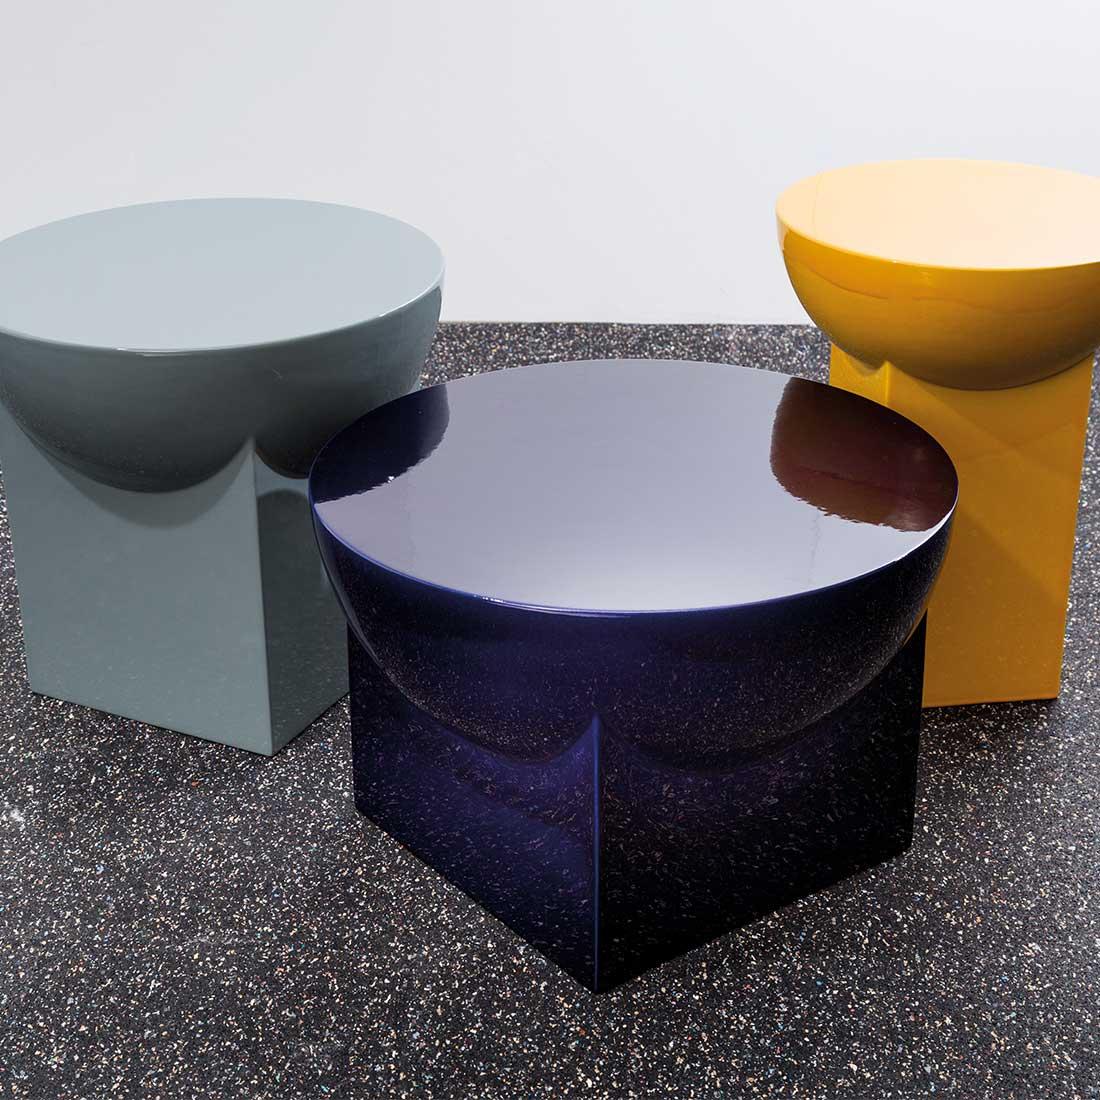 Three heights from one source, in two different shapes always based on the motto “the round must go into the square” – and it does! Sebastian Herkner’s side table series mila of massive ceramics form a slender foot, rounded up by a broad, smooth